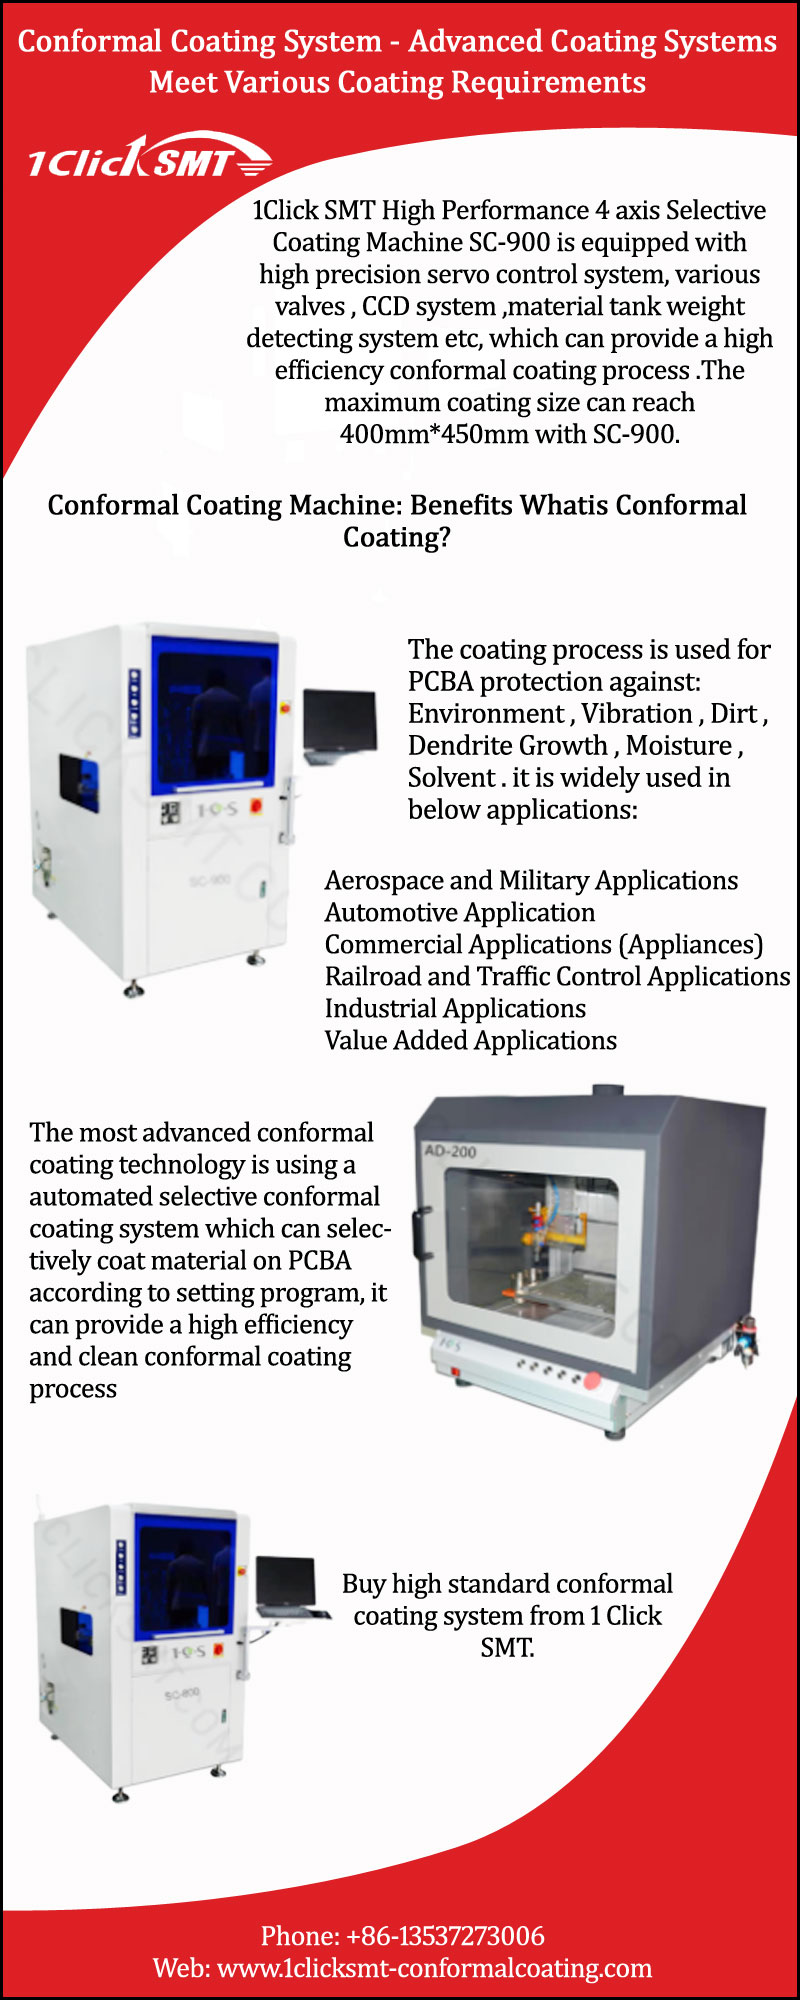 Conformal Coating System - Advanced Coating Systems Meet Various Coating Requirements.jpg Conformal Coating System  by 1clicksmtconformal